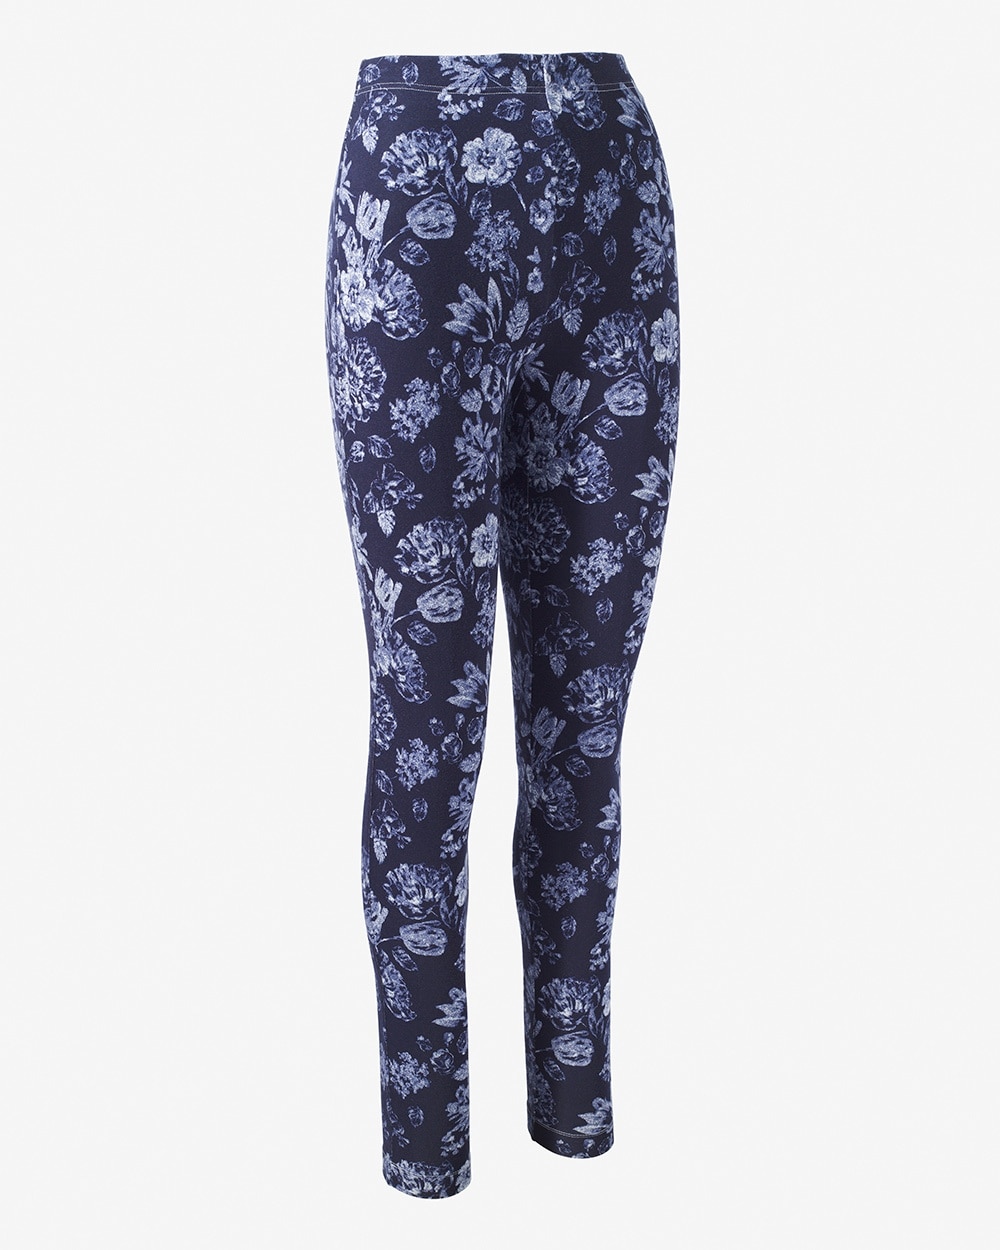 Fabulously Slimming Exploded Floral Leggings